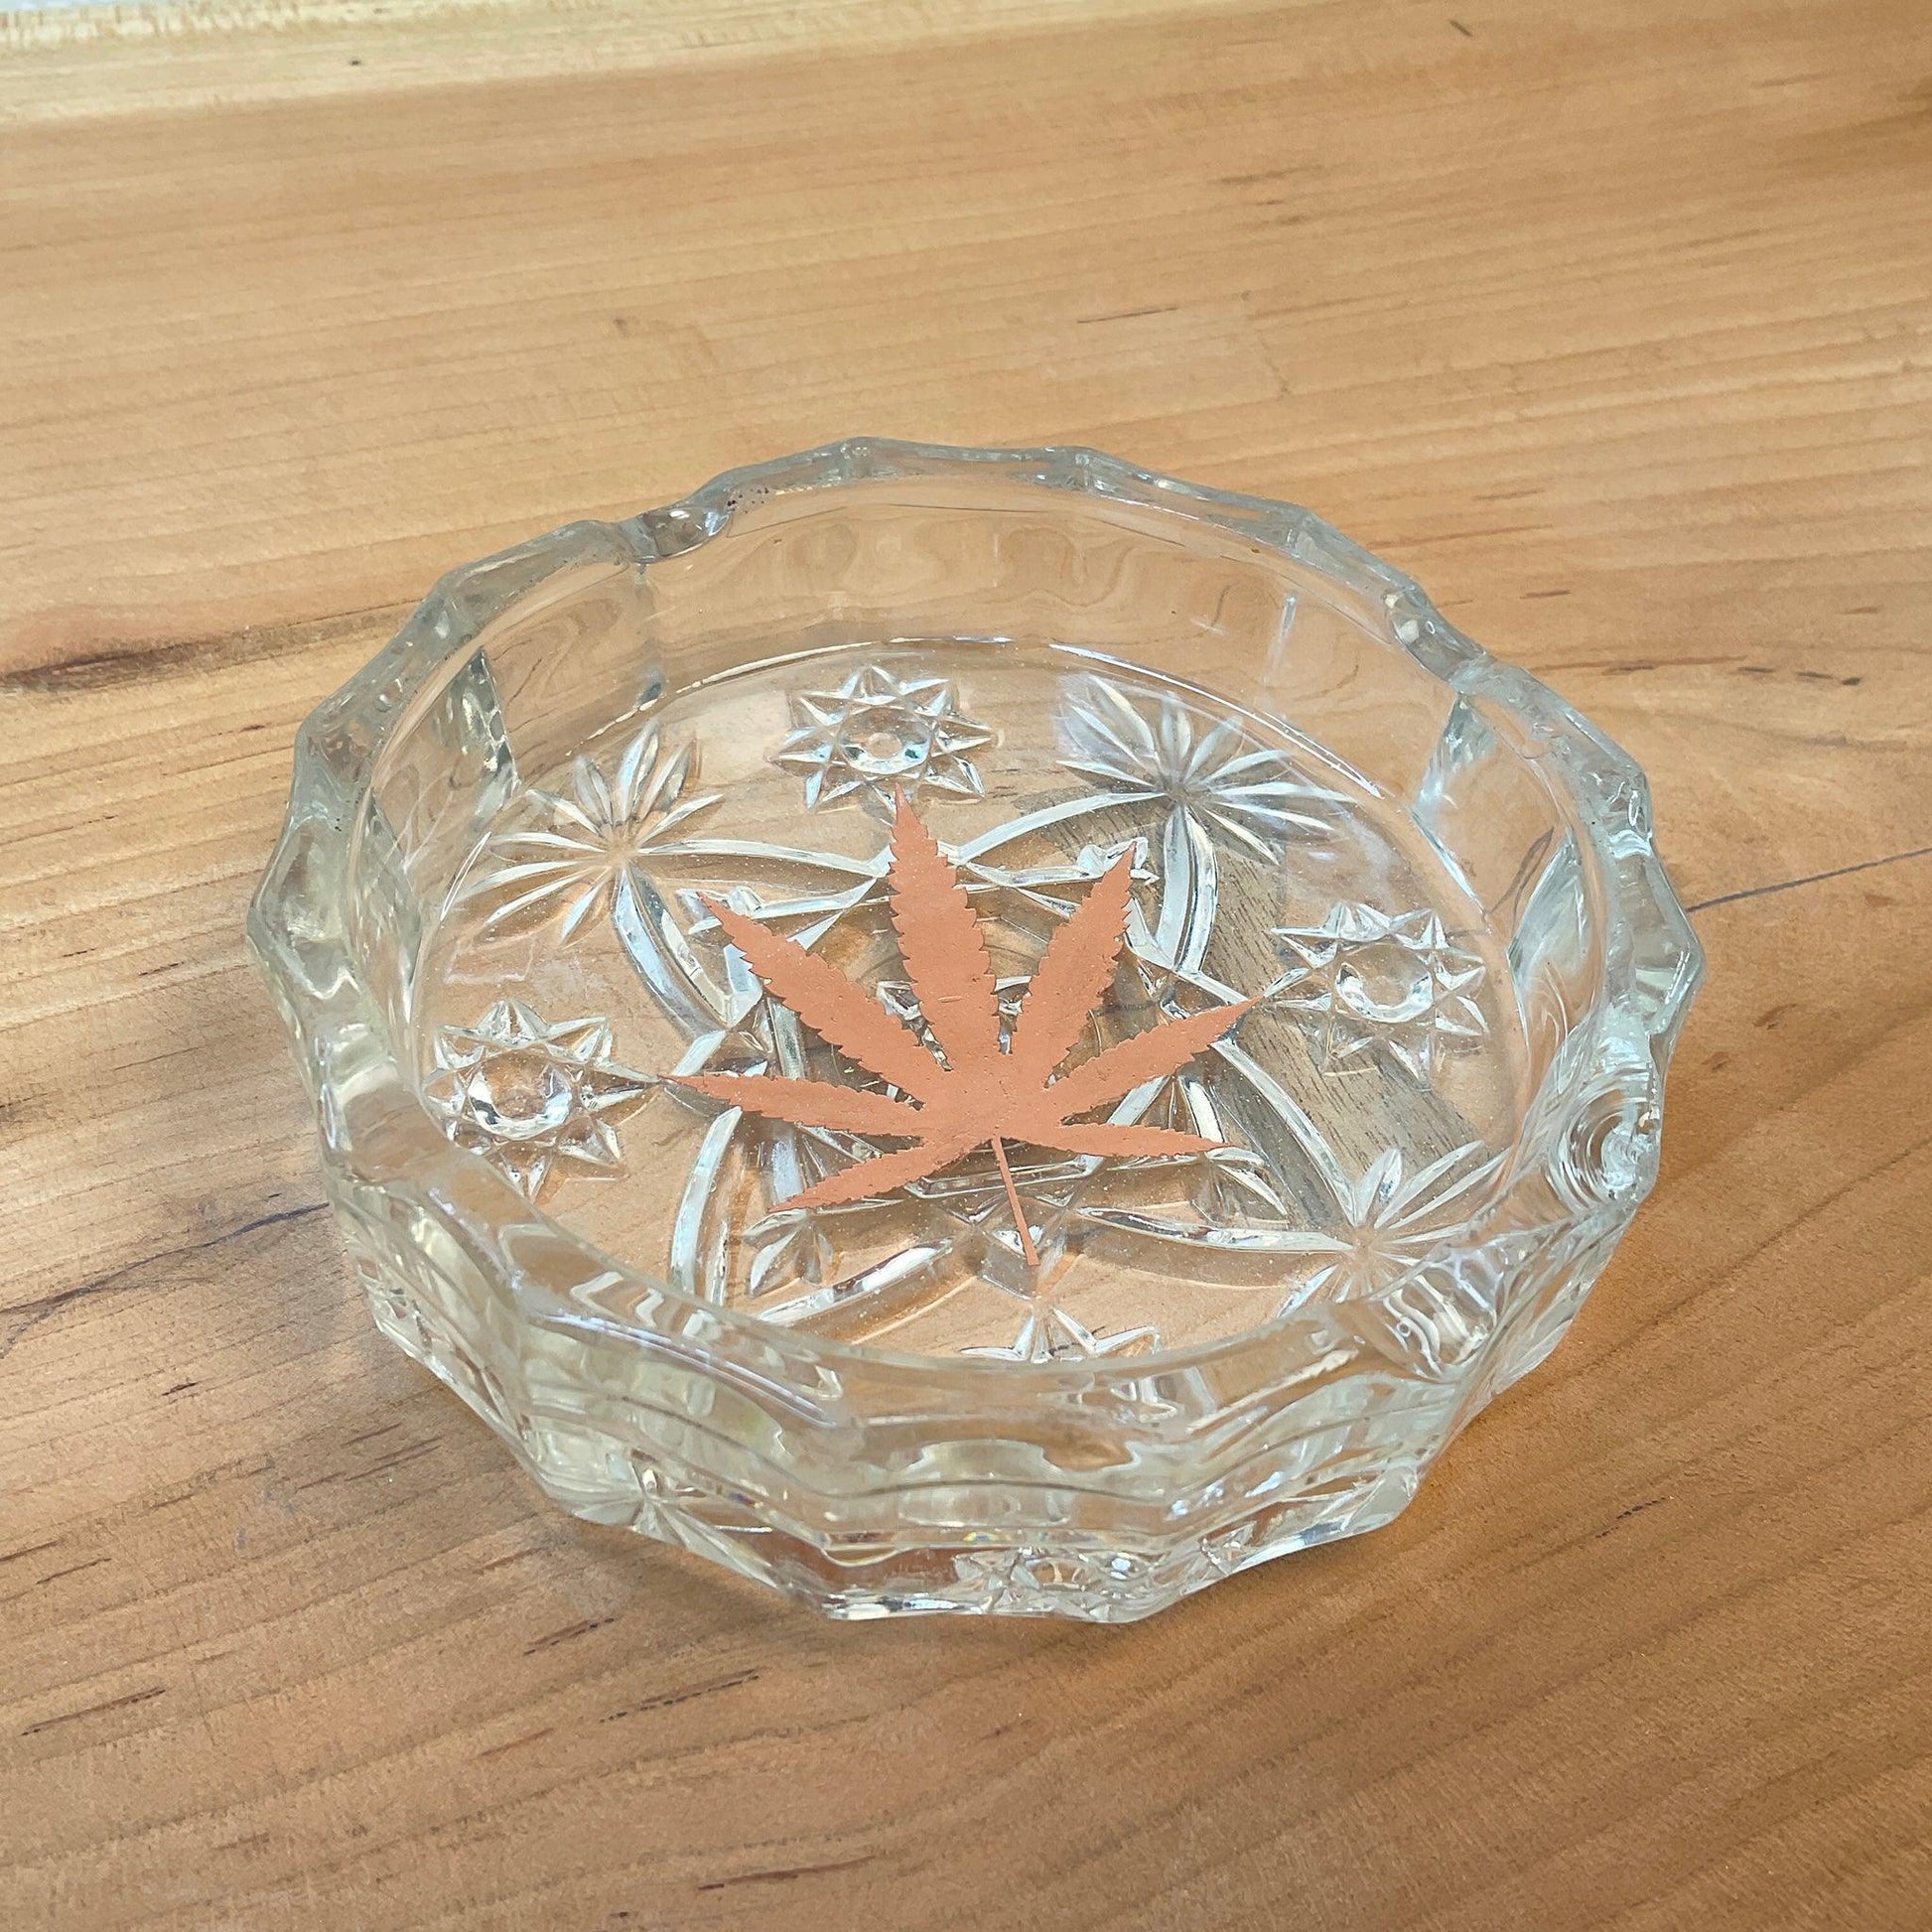 Cannabis Ashtray - Offensively Domestic